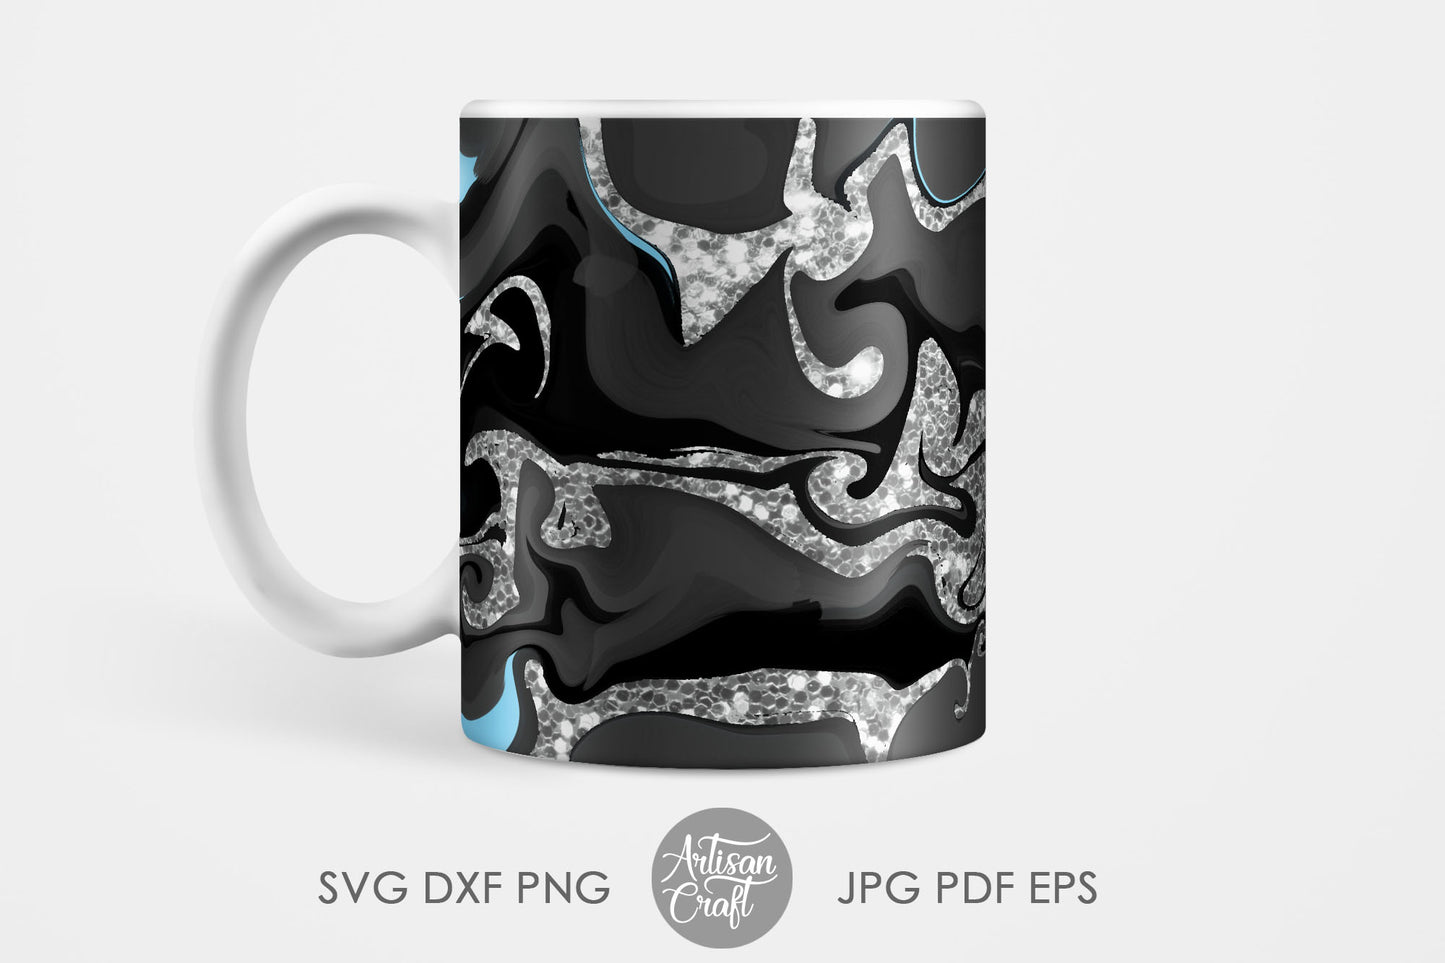 11 oz mug sublimation PNG with marble effect